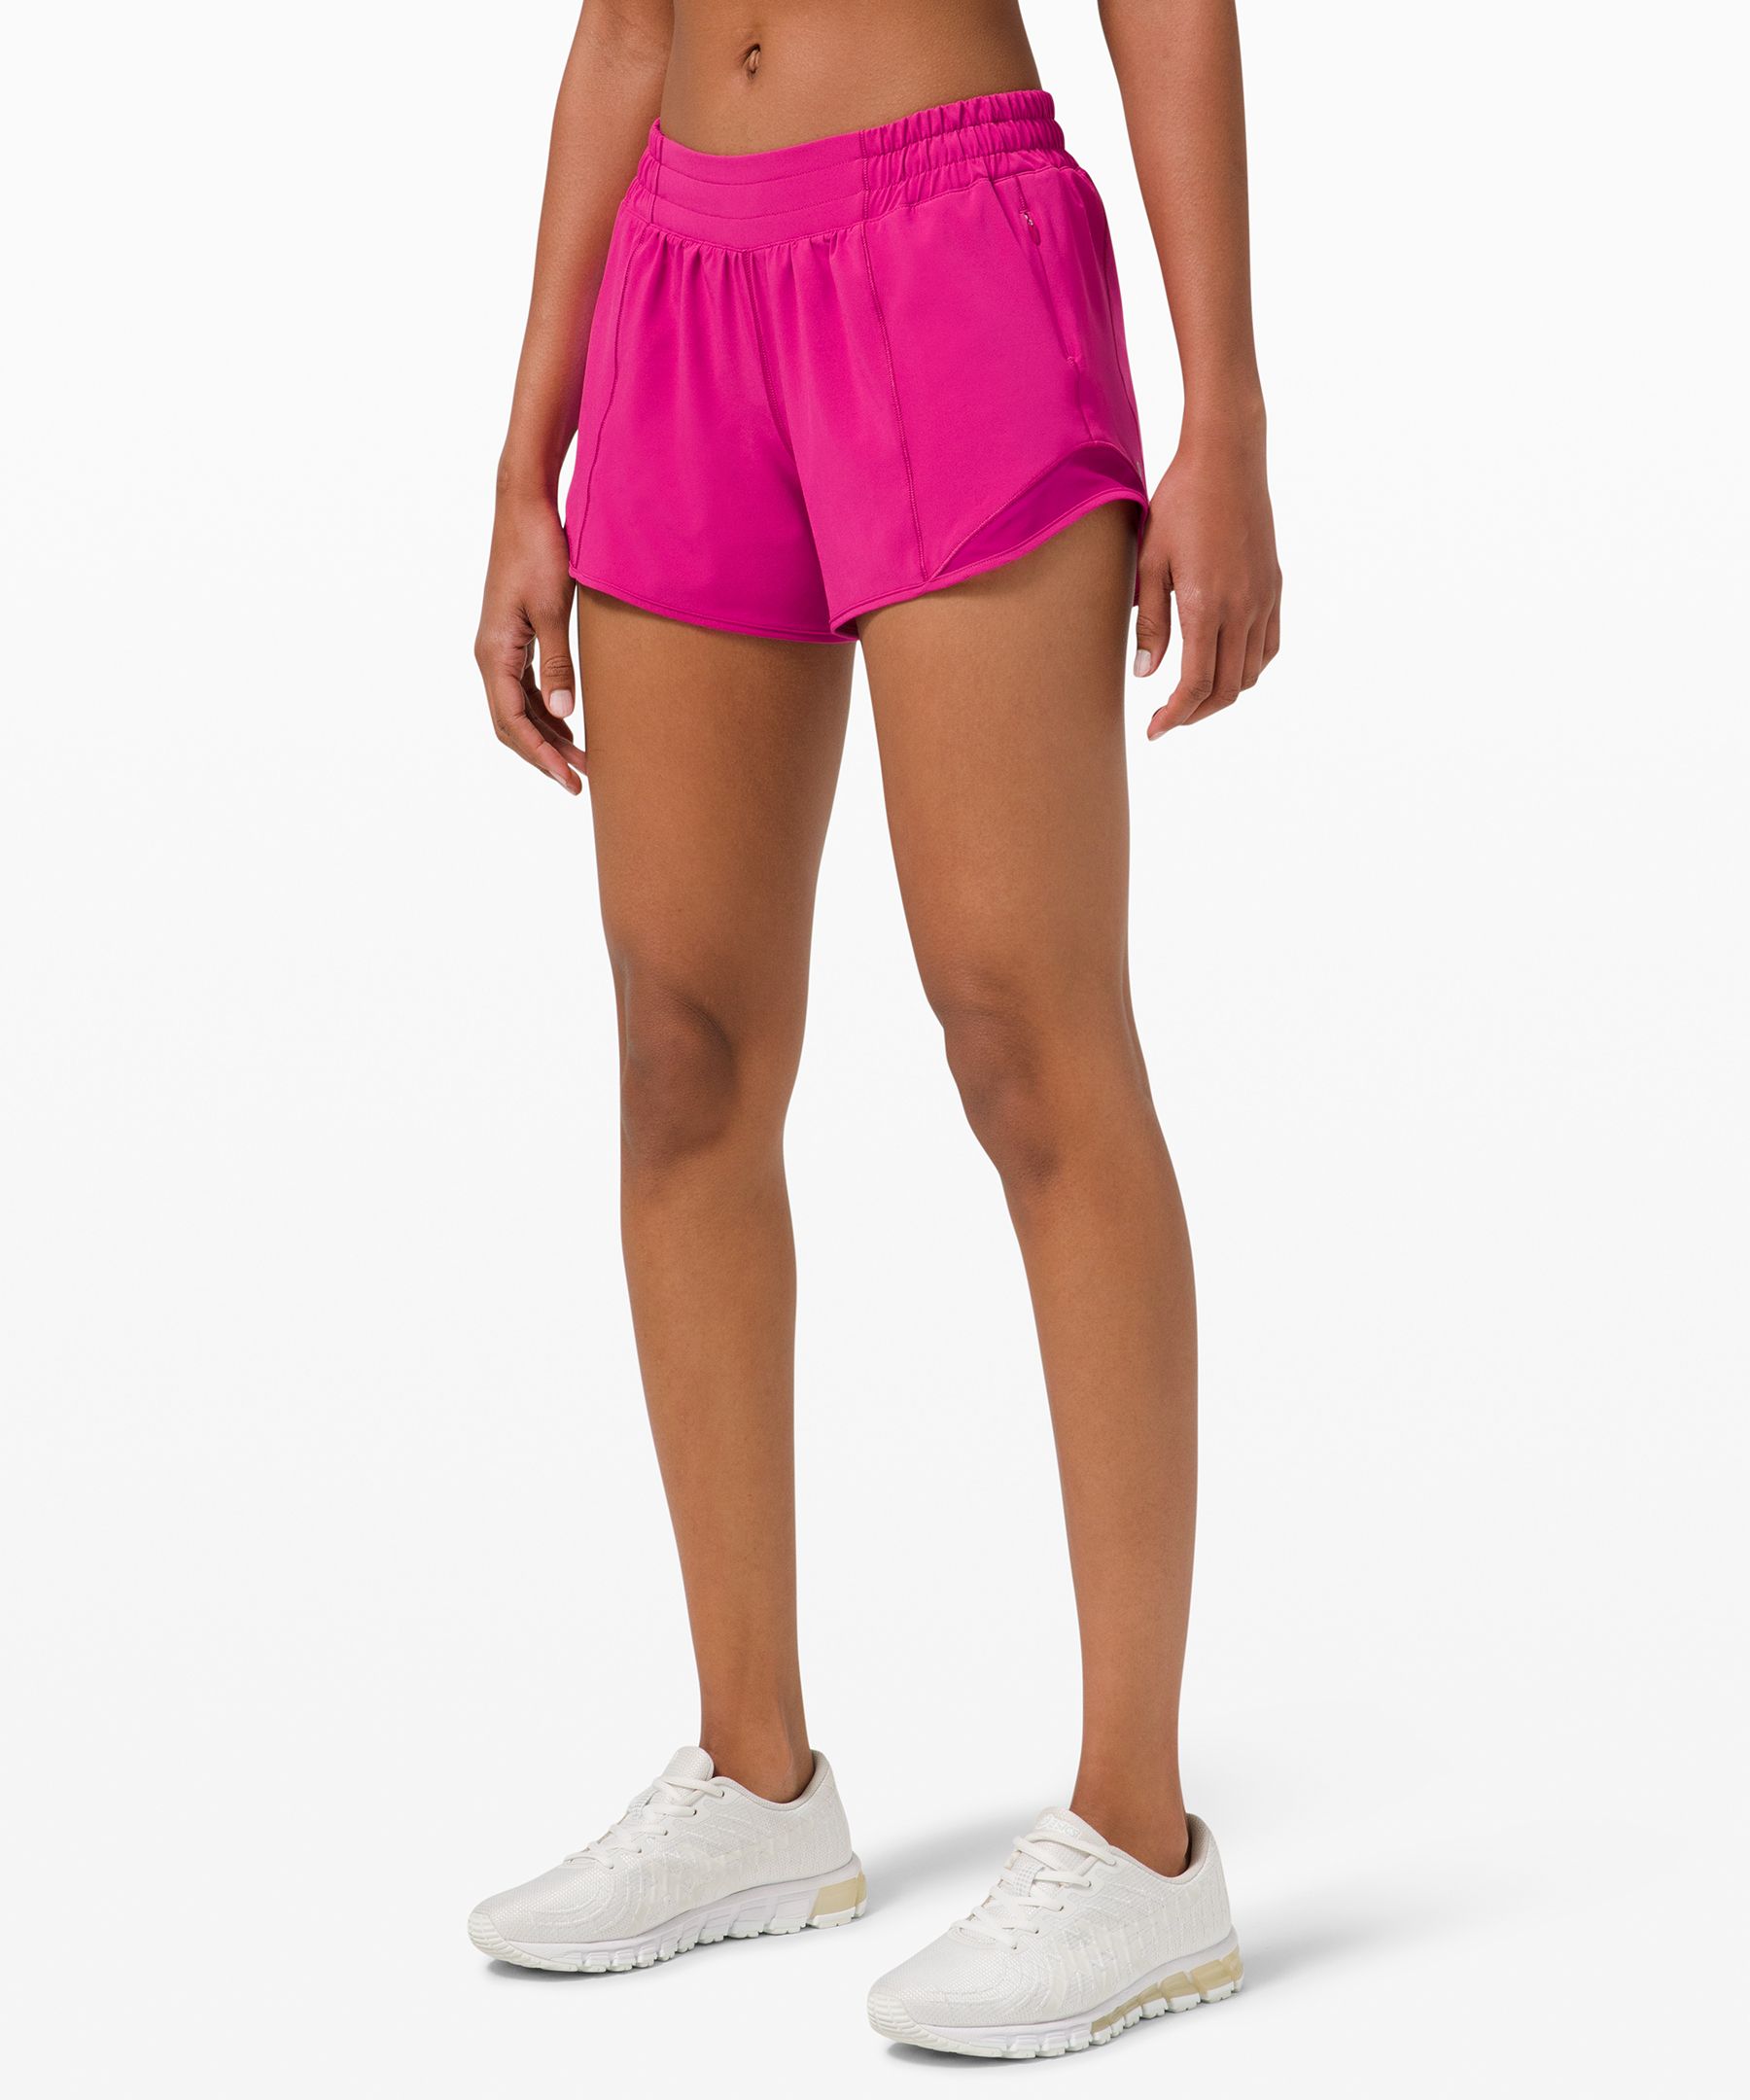 Lululemon Hotty Hot Low-rise Lined Shorts 4" In Ripened Raspberry